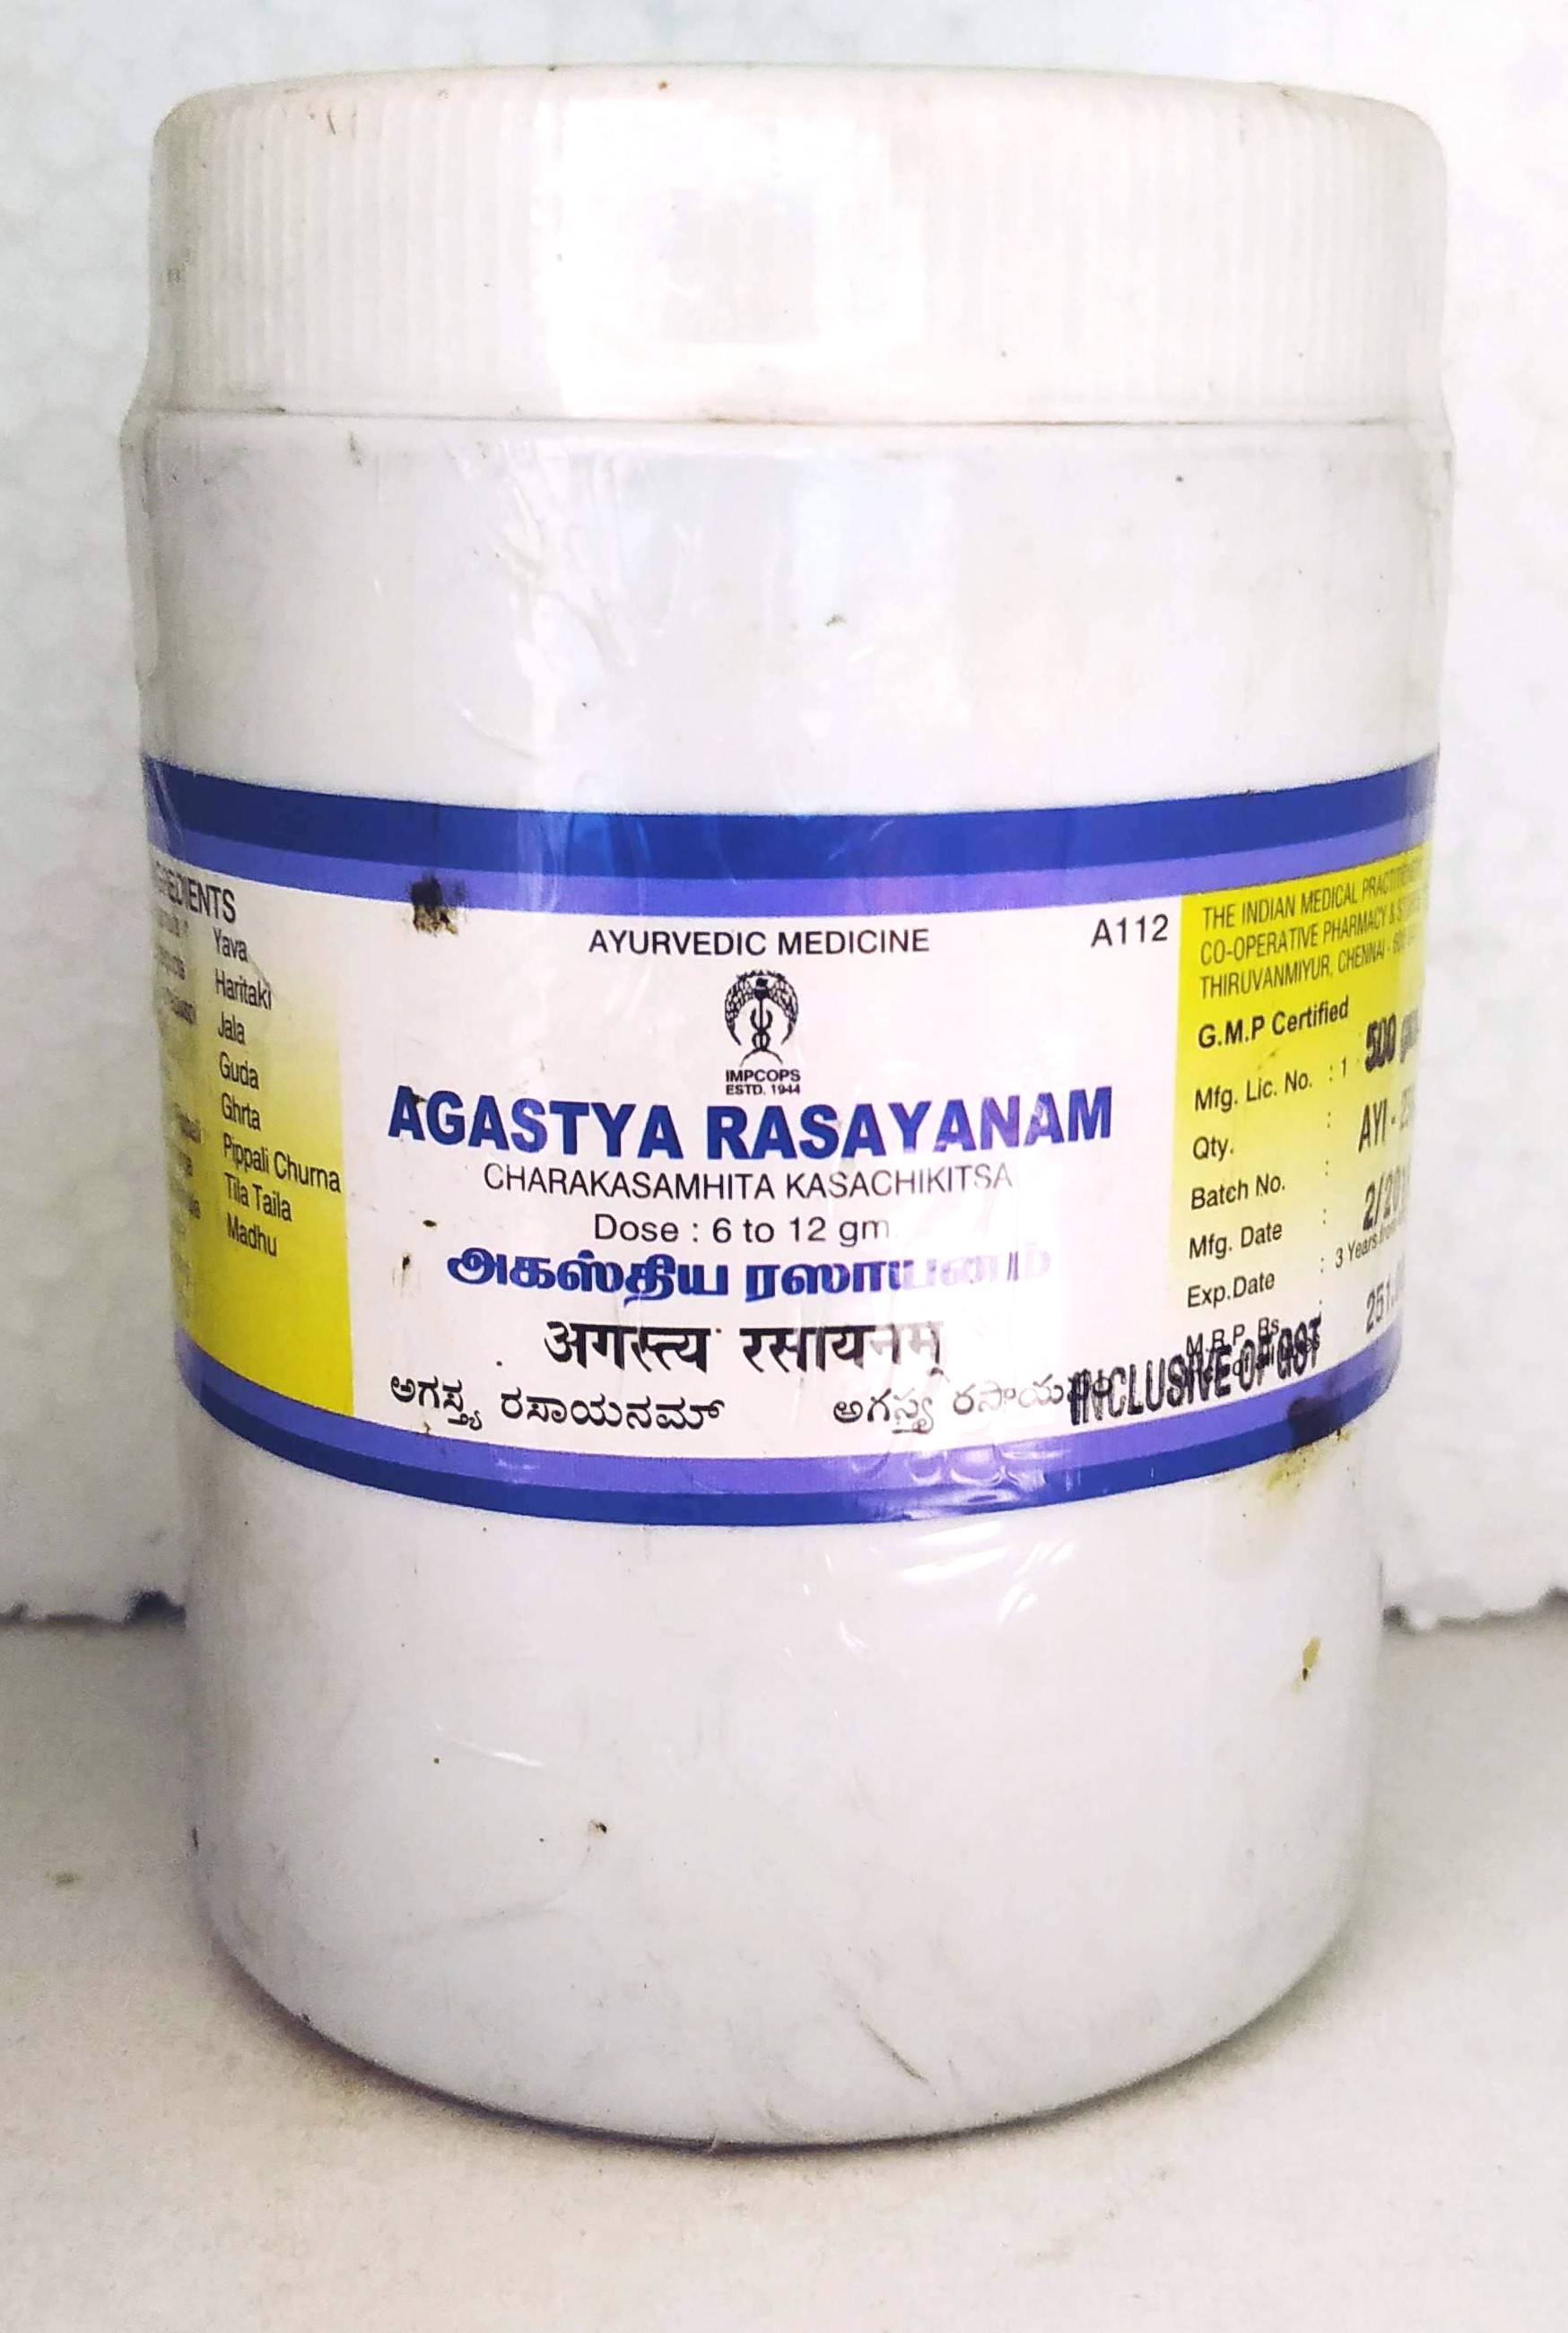 Shop Impcops Agastya Rasayanam 500g at price 314.00 from Impcops Online - Ayush Care